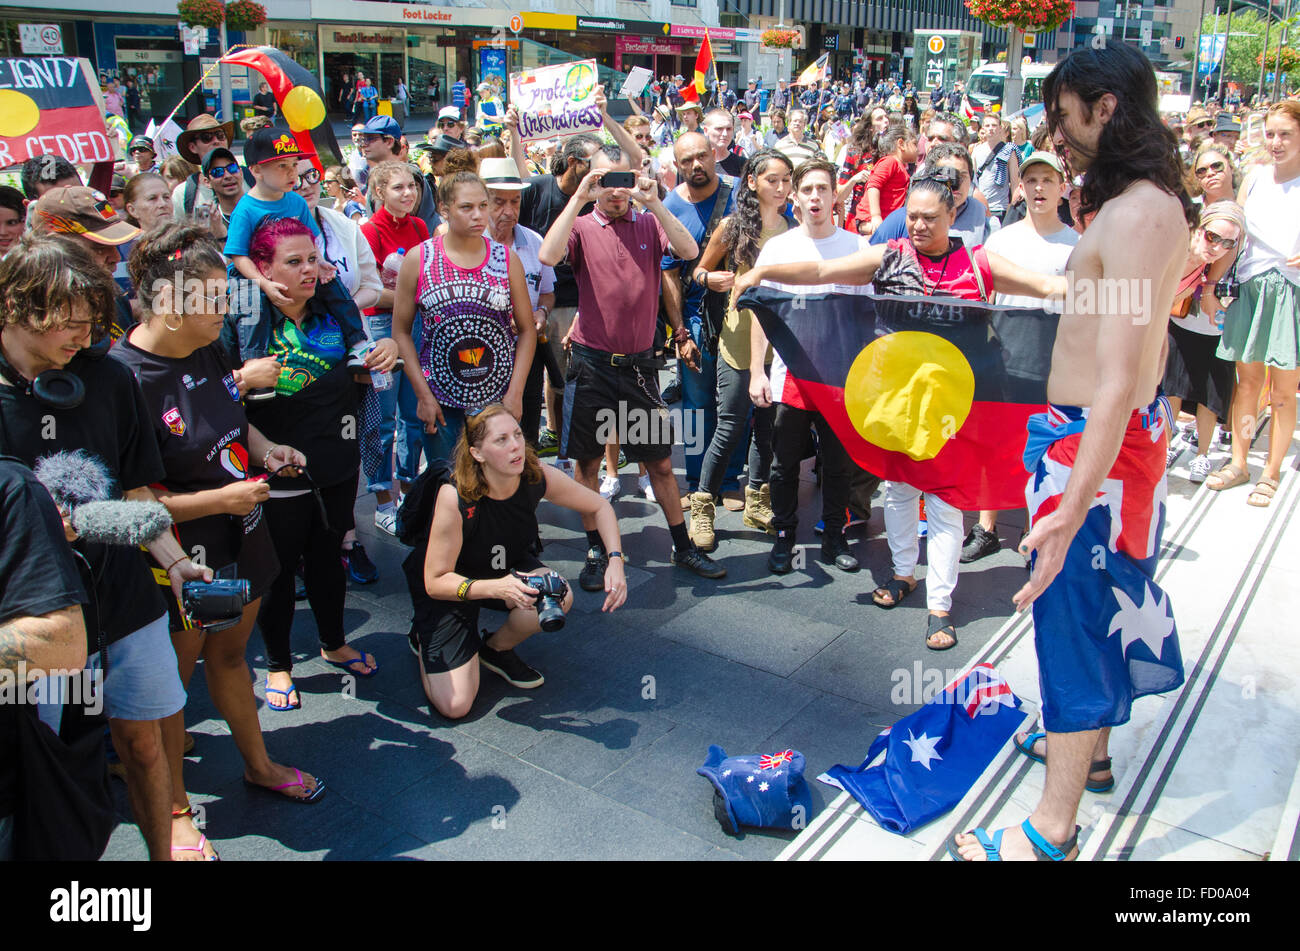 Sydney, Australia - 26th January 2016: The Sydney Invasion Day March Protest brought together Aboriginal people and supporters voicing their opinions about Aboriginal land / culture. The march started at The Block in Redfern and then moved to Sydney's Town Hall. The date is also celebrated as Australia Day marking the arrival of the First Fleet. Credit:  mjmediabox/Alamy Live News Stock Photo